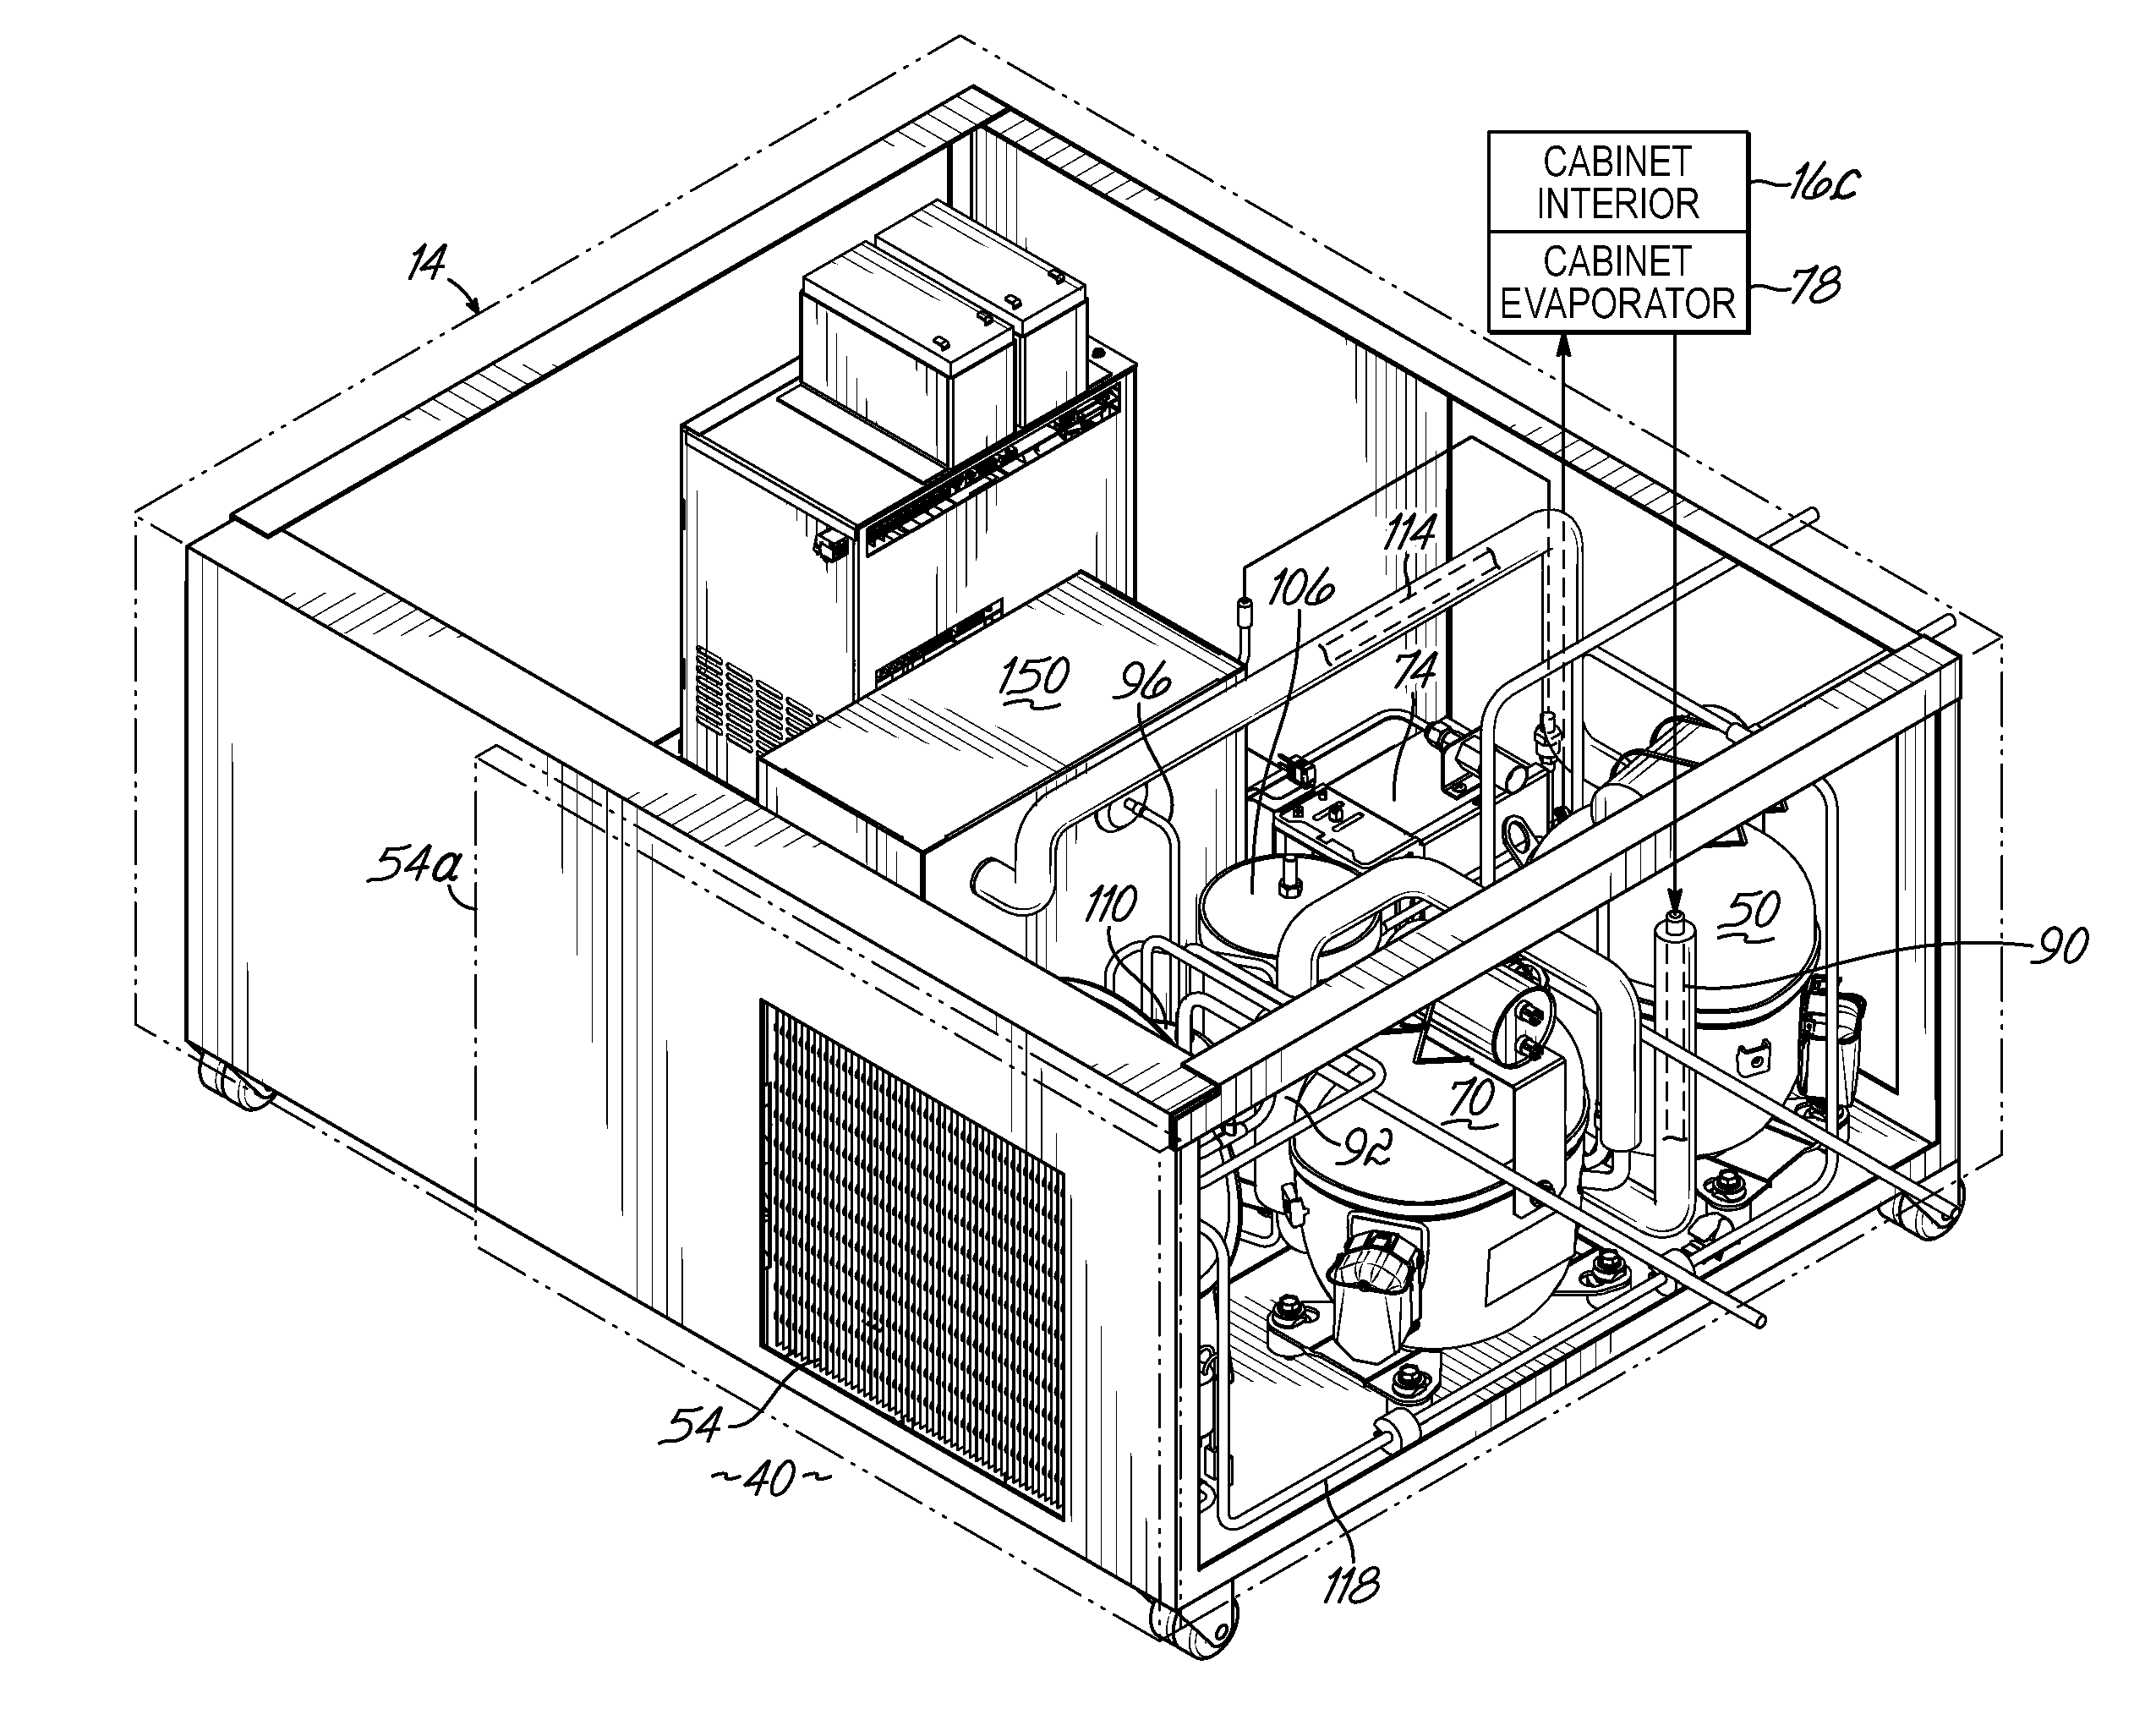 Refrigeration system mounted within a deck